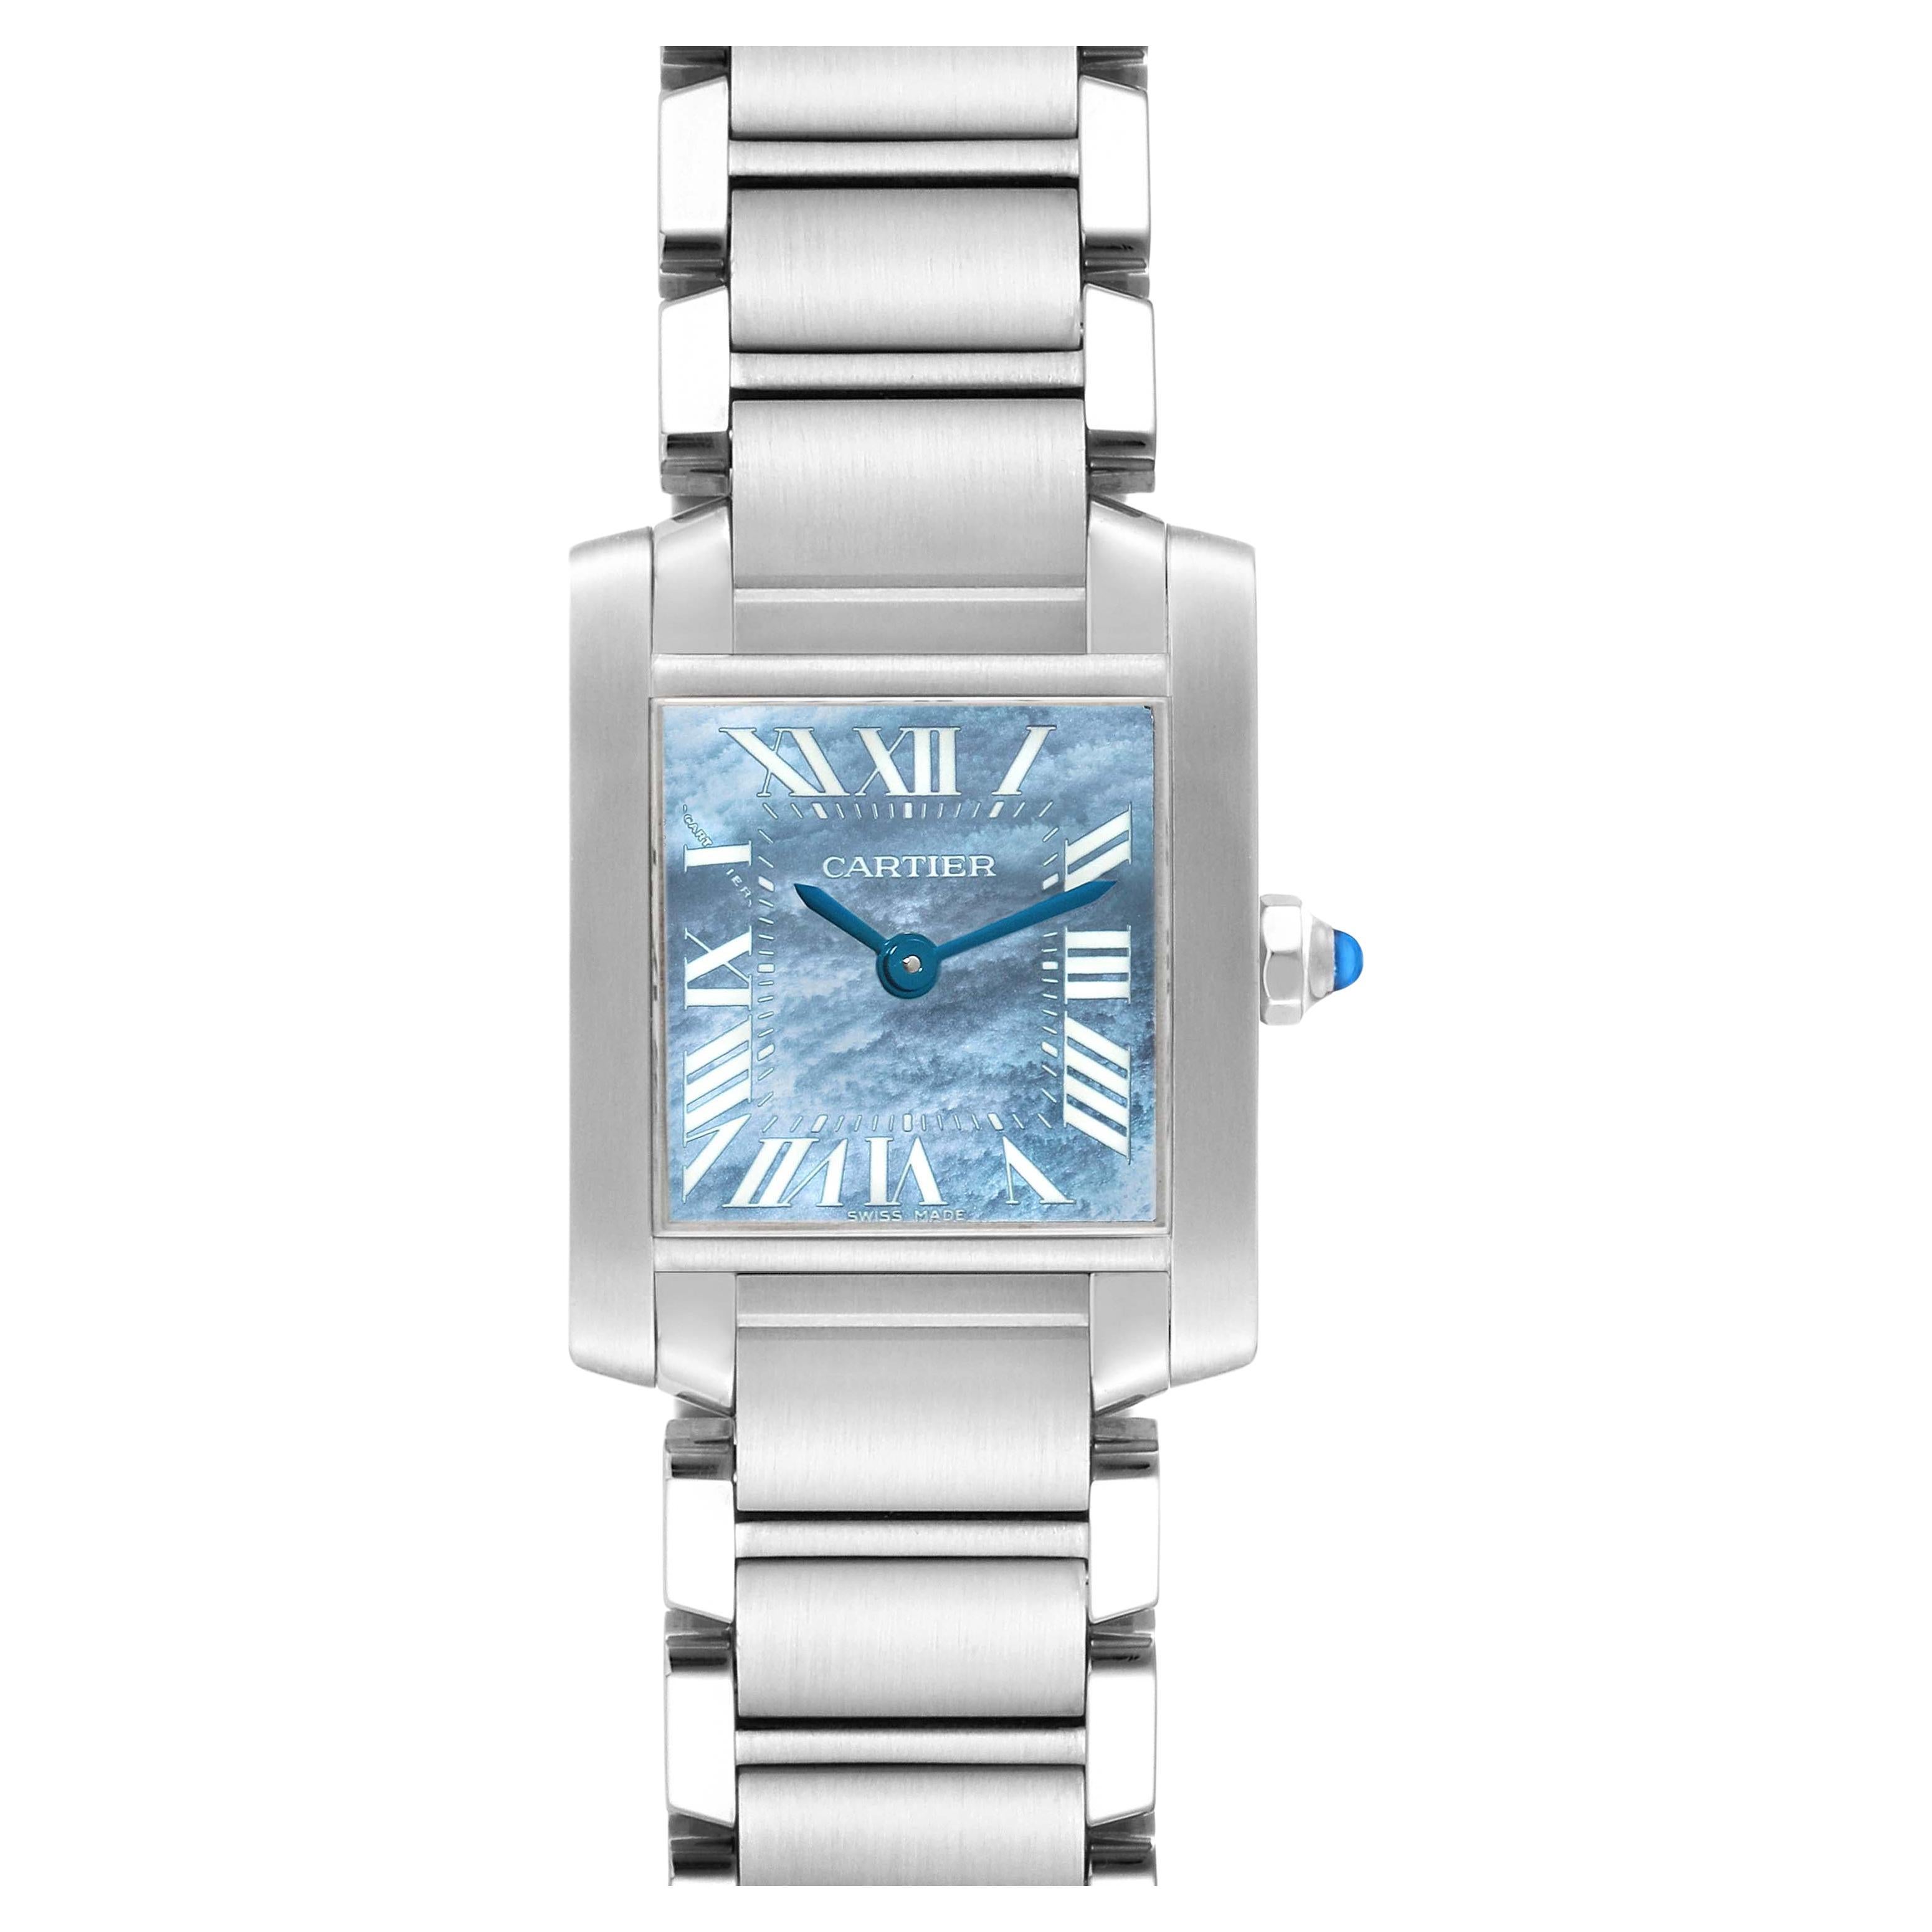 Cartier Tank Francaise Blue Mother of Pearl Dial Steel Ladies Watch W51034Q3